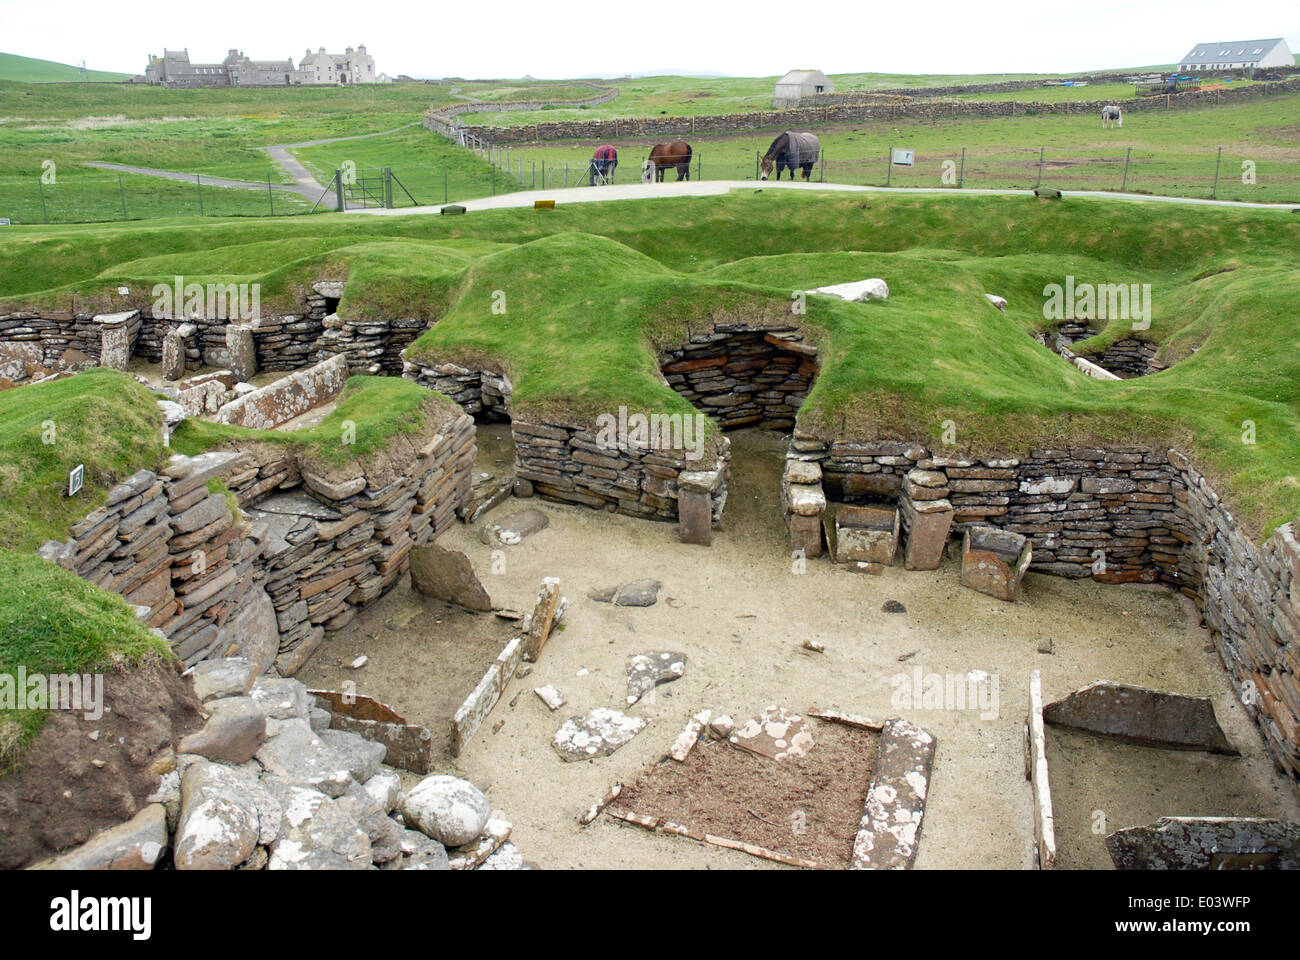 Skara Brae neolithic settlement, Bay of Skaill, Mainland, Orkney. The patch of reddish earth indicates the hearth of the hut. Stock Photo